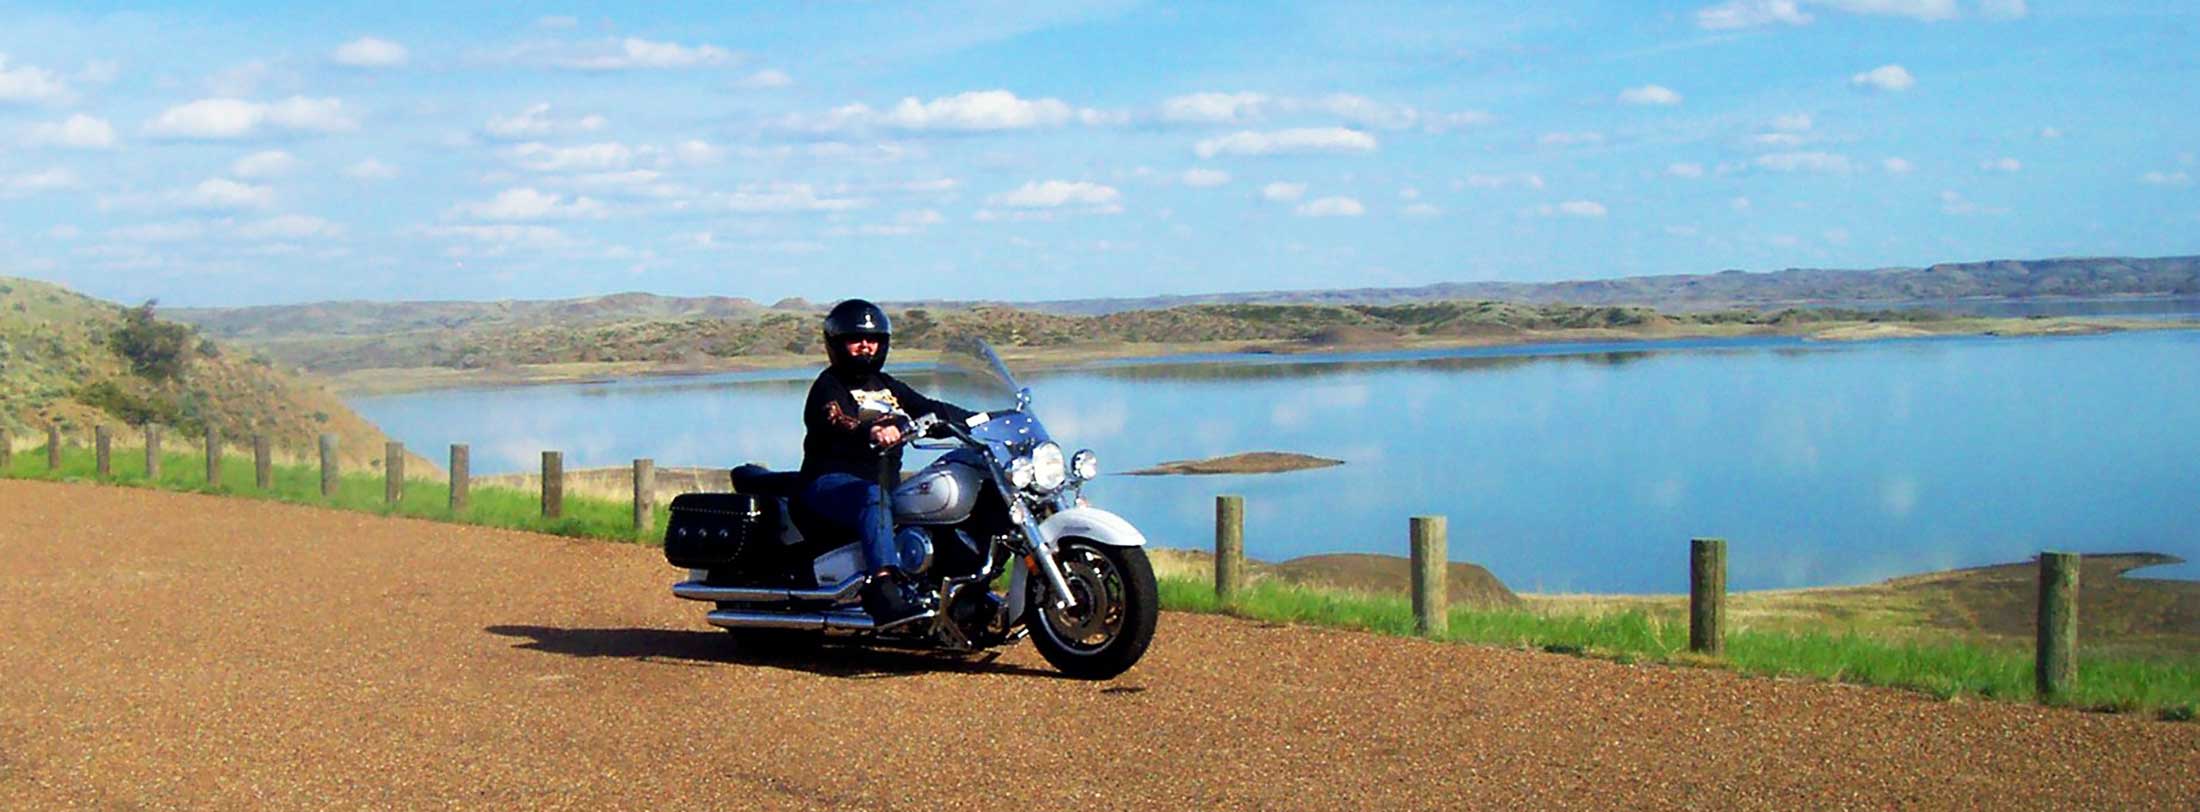 Motorcycles | Montana’s Missouri River Country